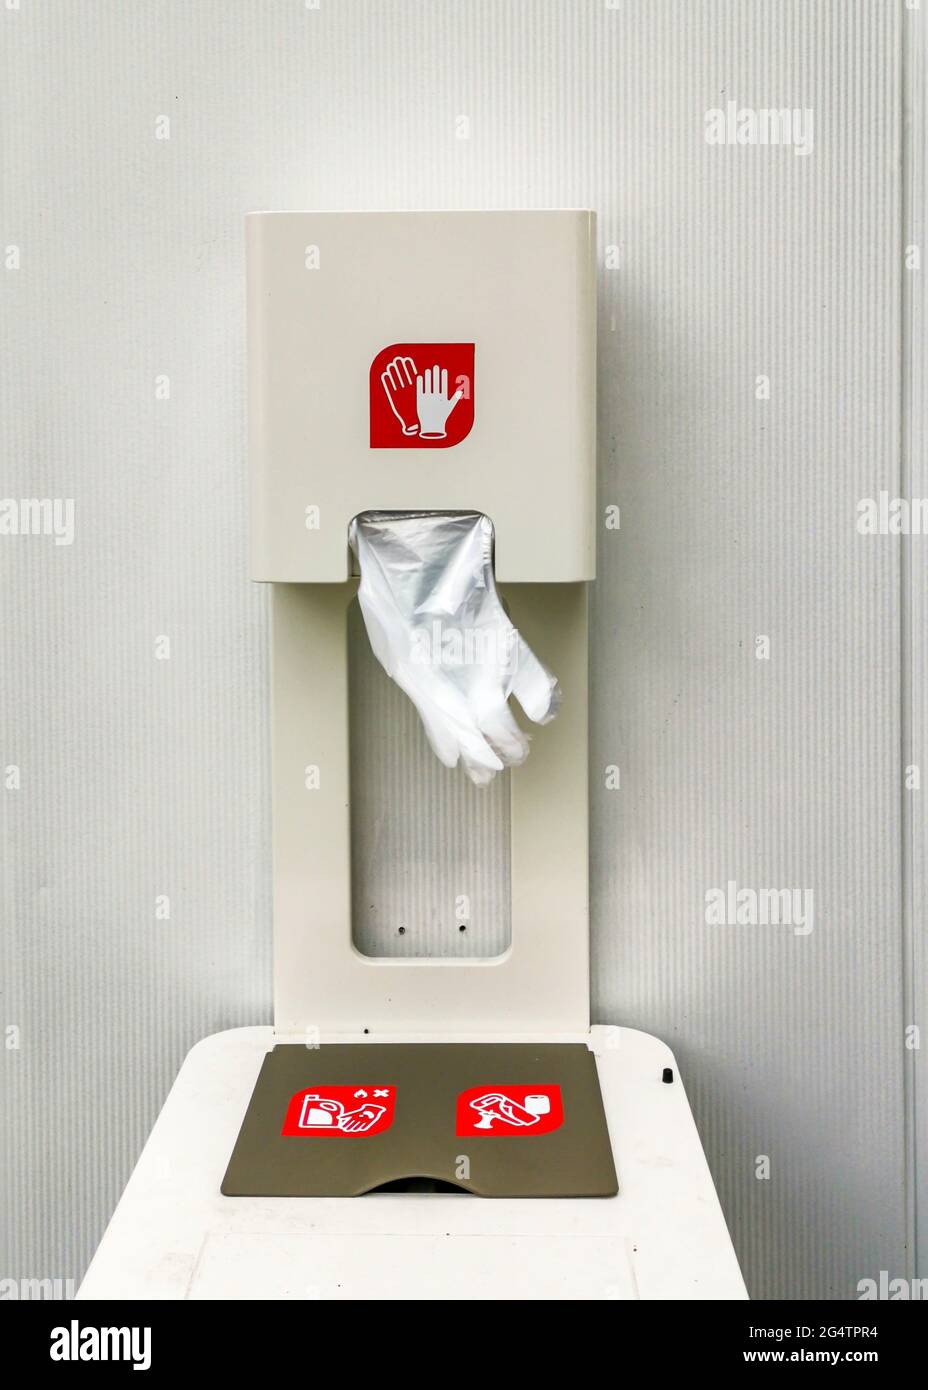 dispenser with one-time plastic gloves for self-protection Stock Photo